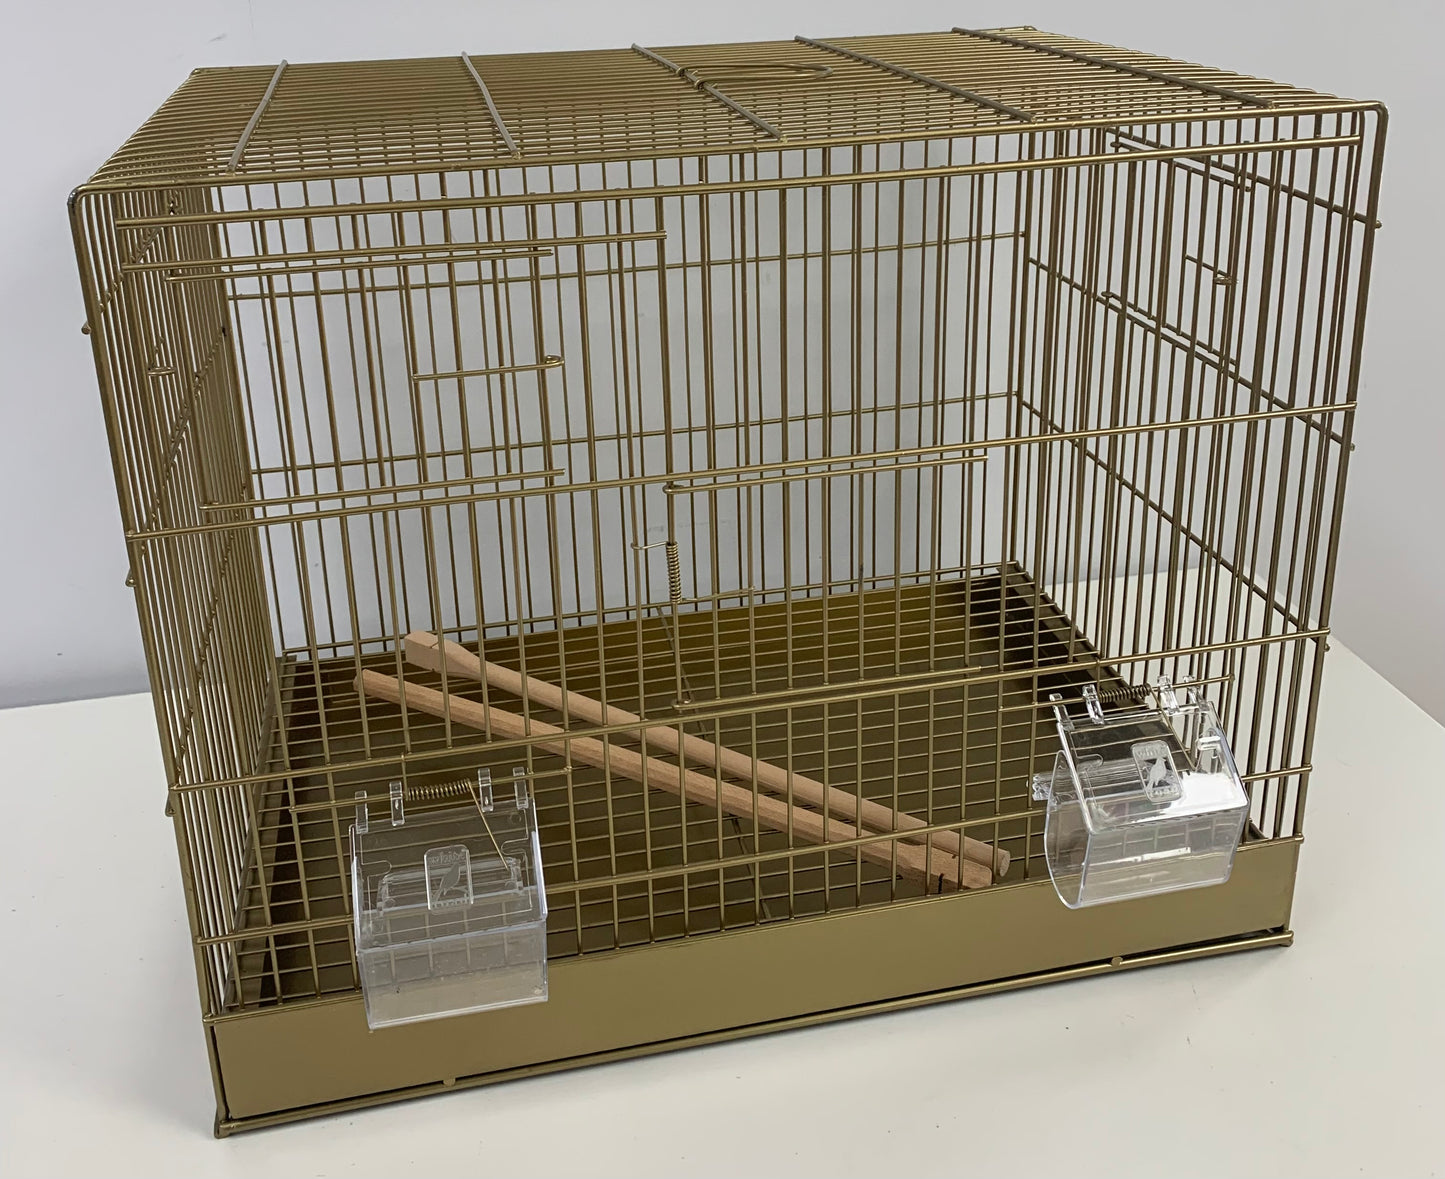 50cm White Metal Single Breeder Cage with a Green Bottom Metal Tray Other colour mixes available  Size 51cm x 35cm x 42cm